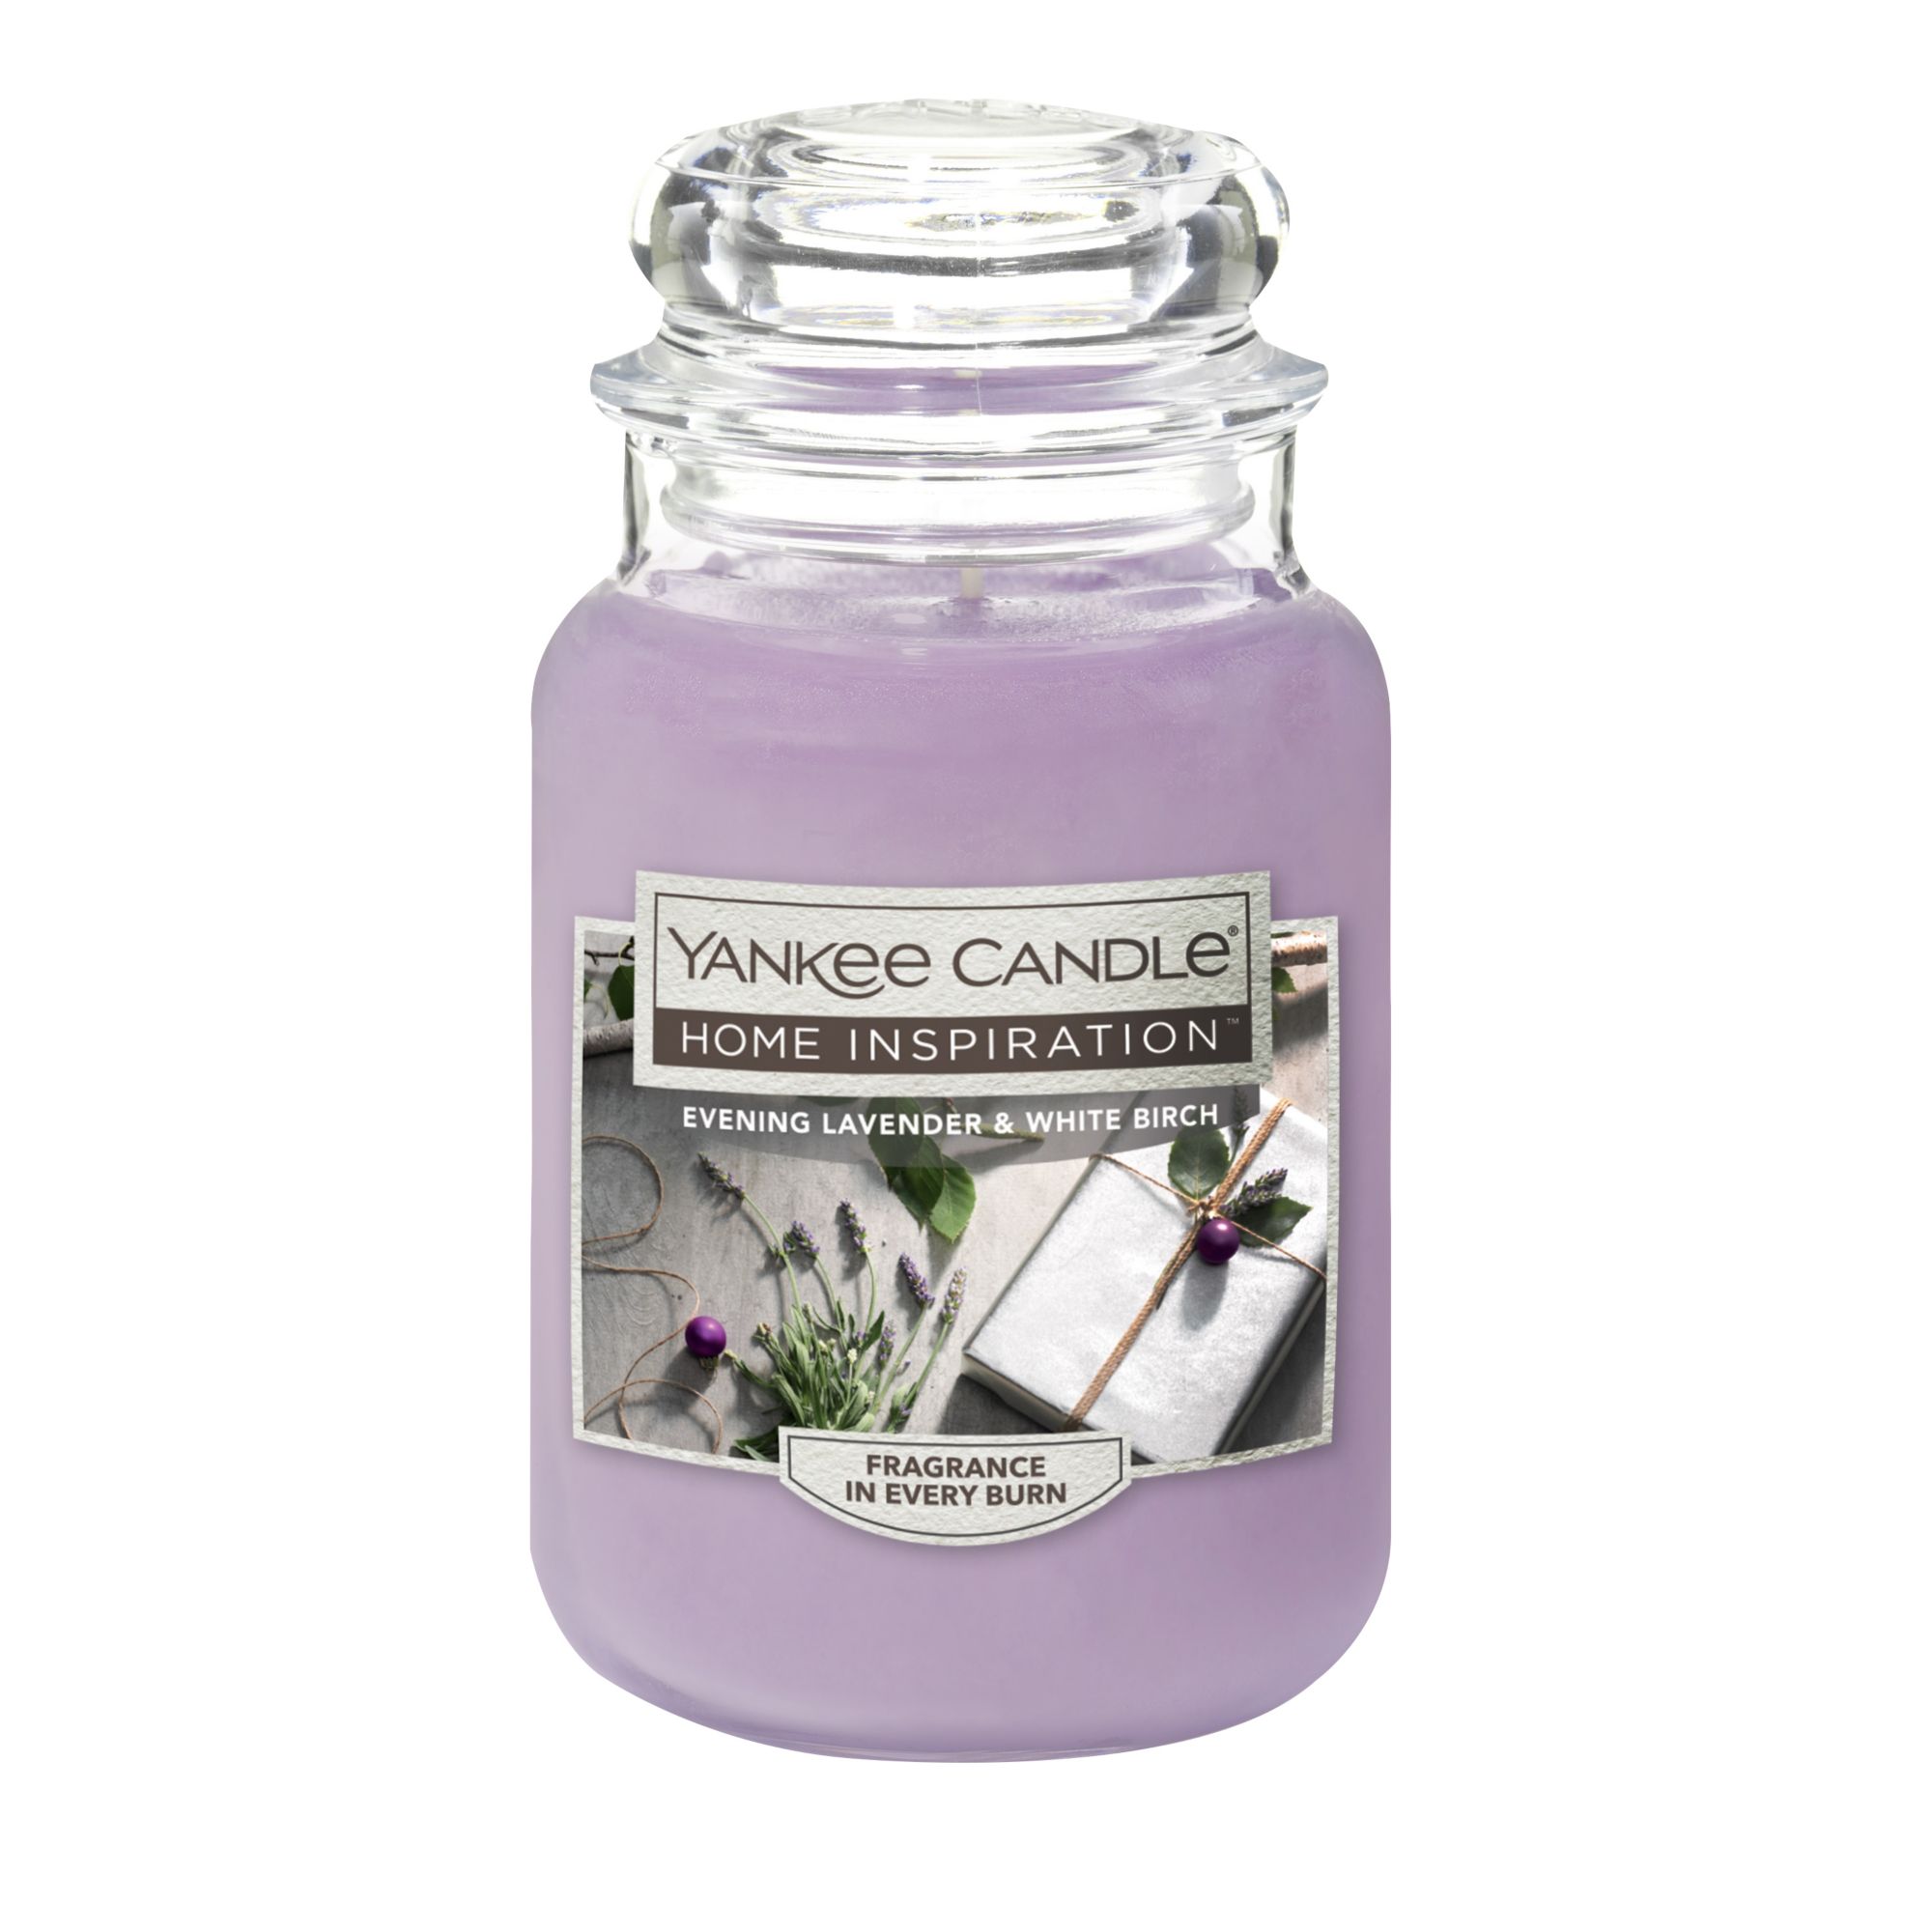 Yankee Lilac Blossoms Wax Melts : Health & Household 